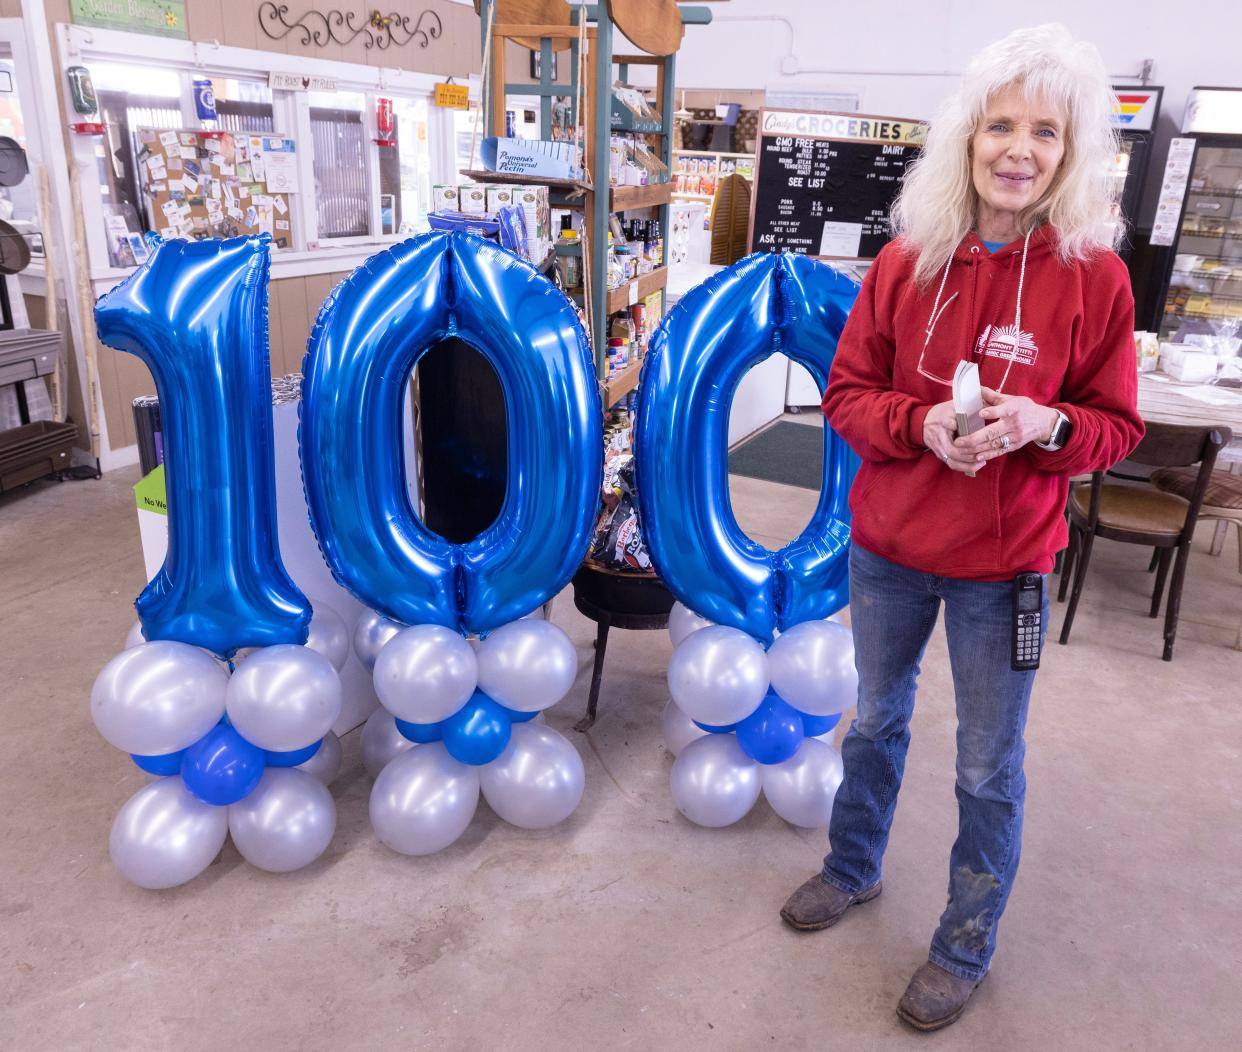 Cindy Petitti-Walton, owner of the Anthony Petitti Organic Greenhouse in Nimishillen Township, talks about their 100th anniversary.